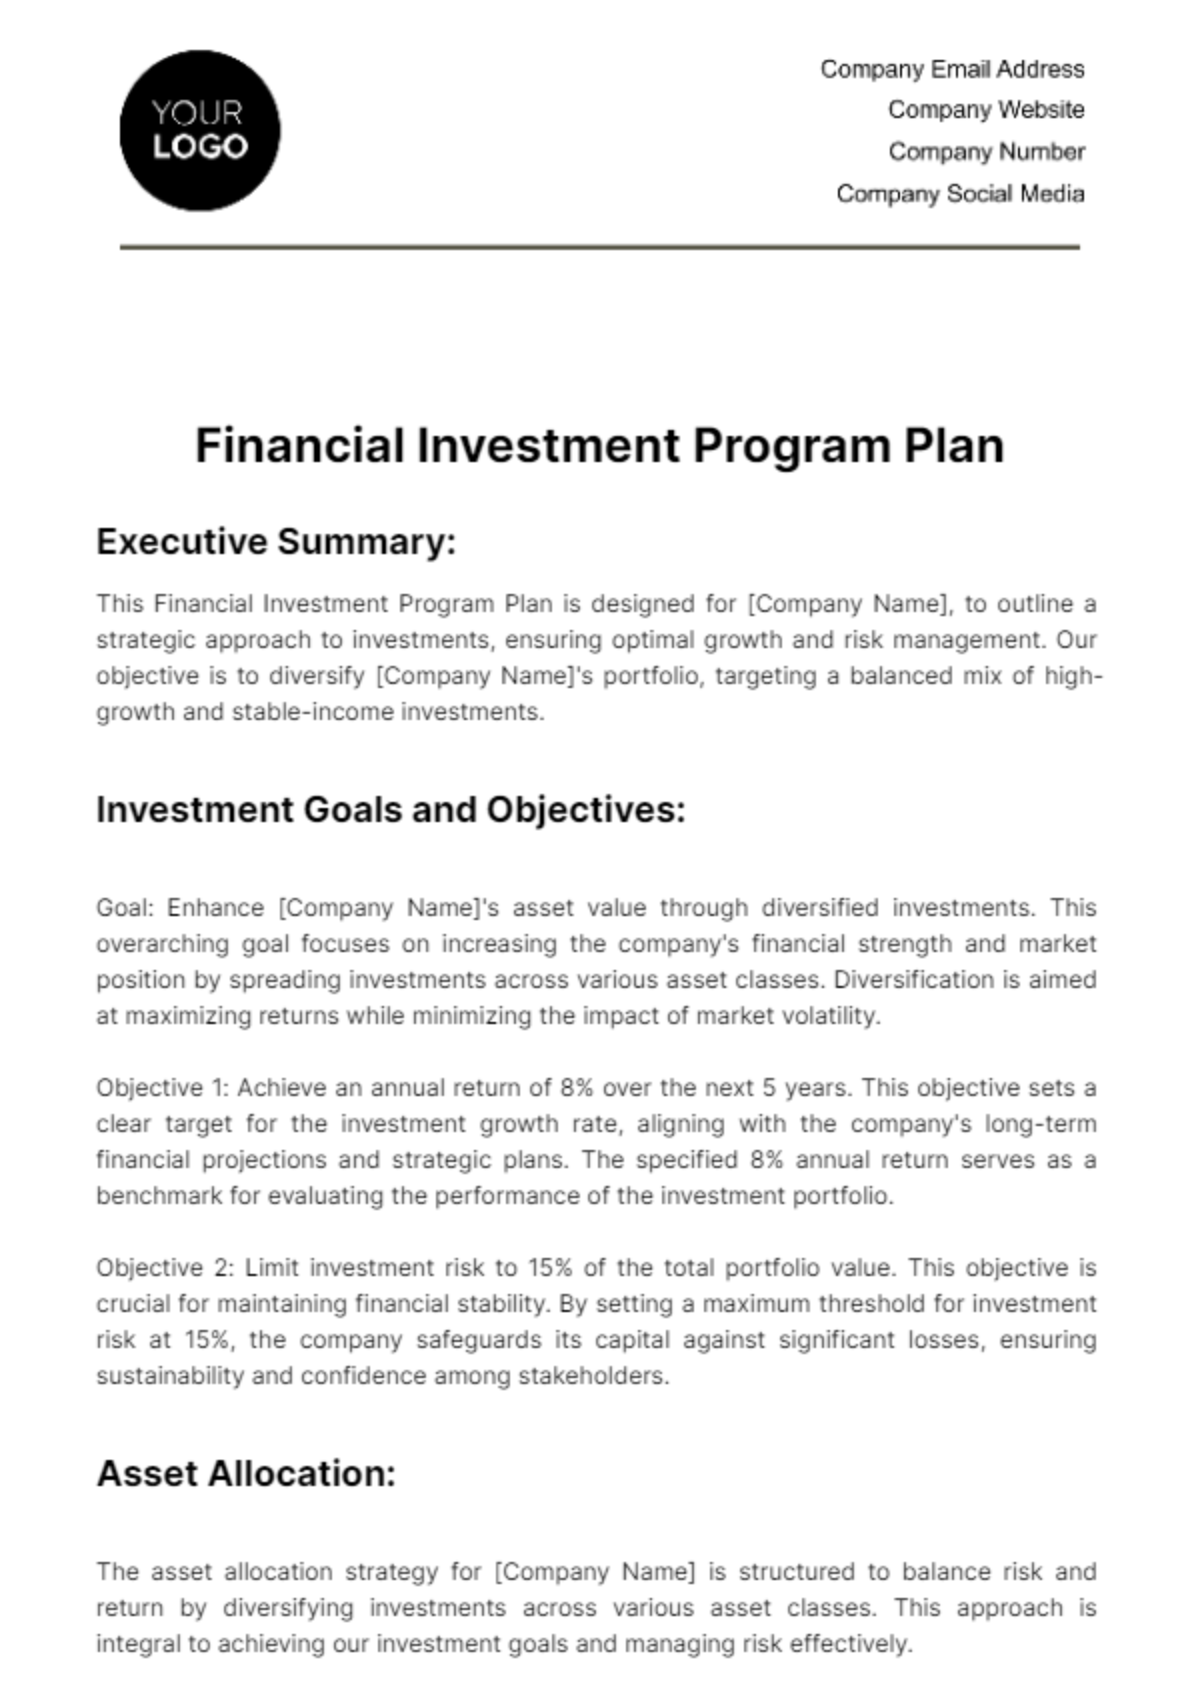 Free Financial Investment Program Plan Template